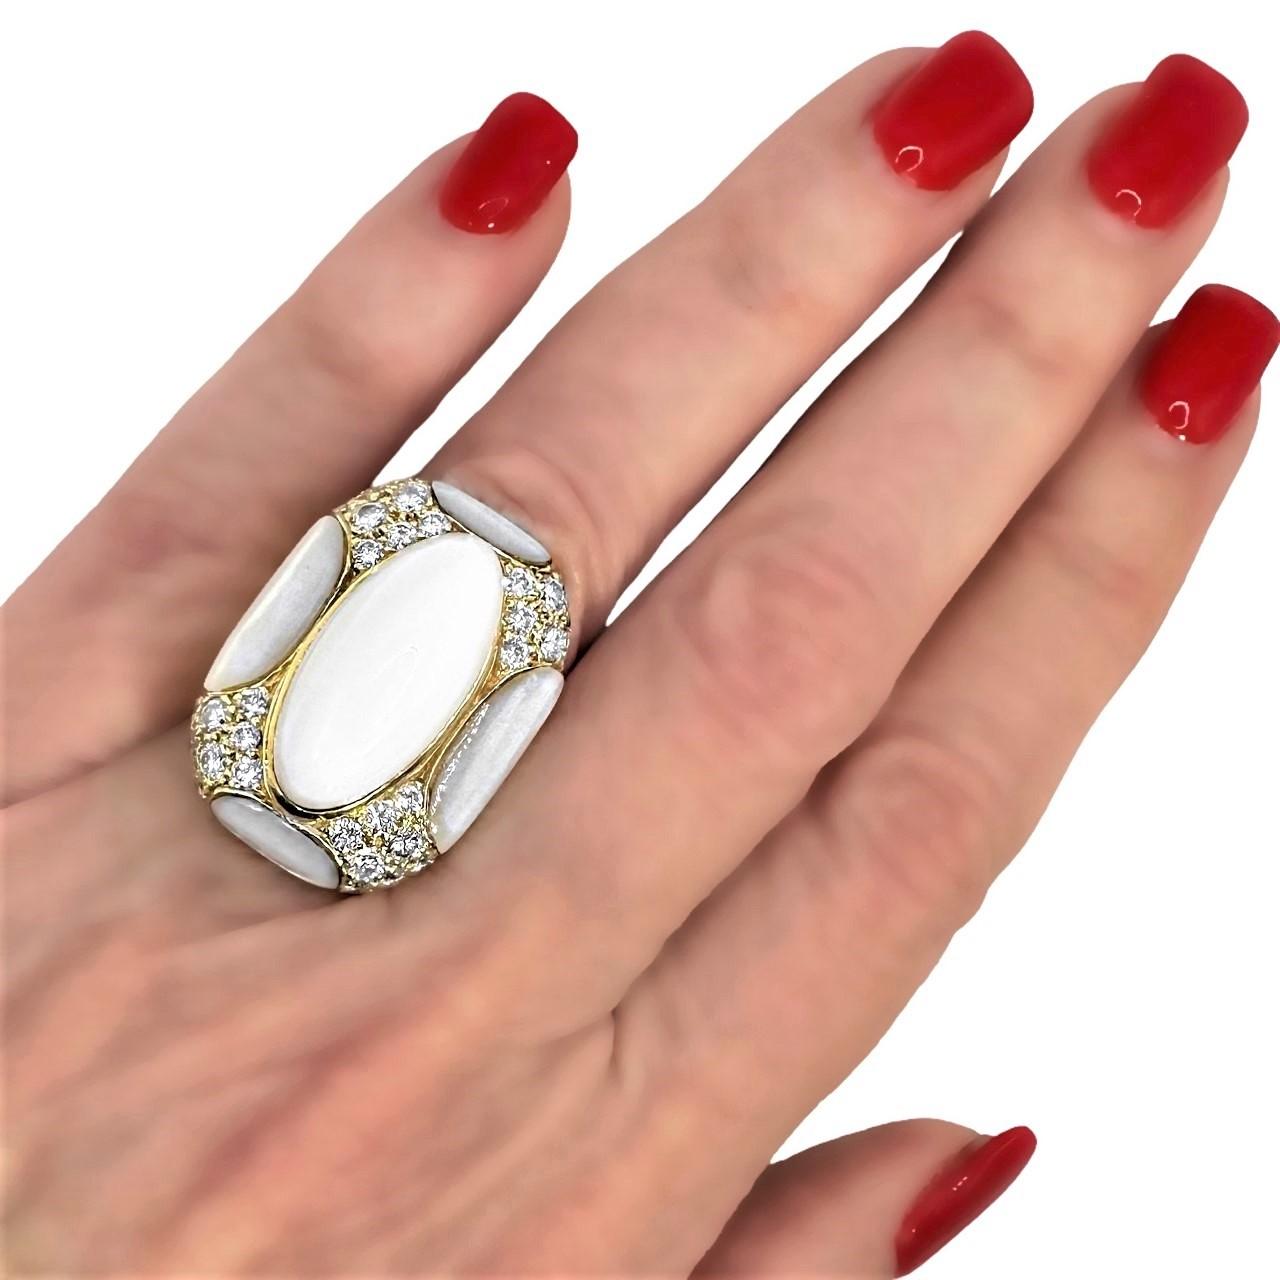 Outstanding 18k Yellow Gold, White Onyx, M.O.P. & Diamond Ring by Albert Lipten For Sale 1